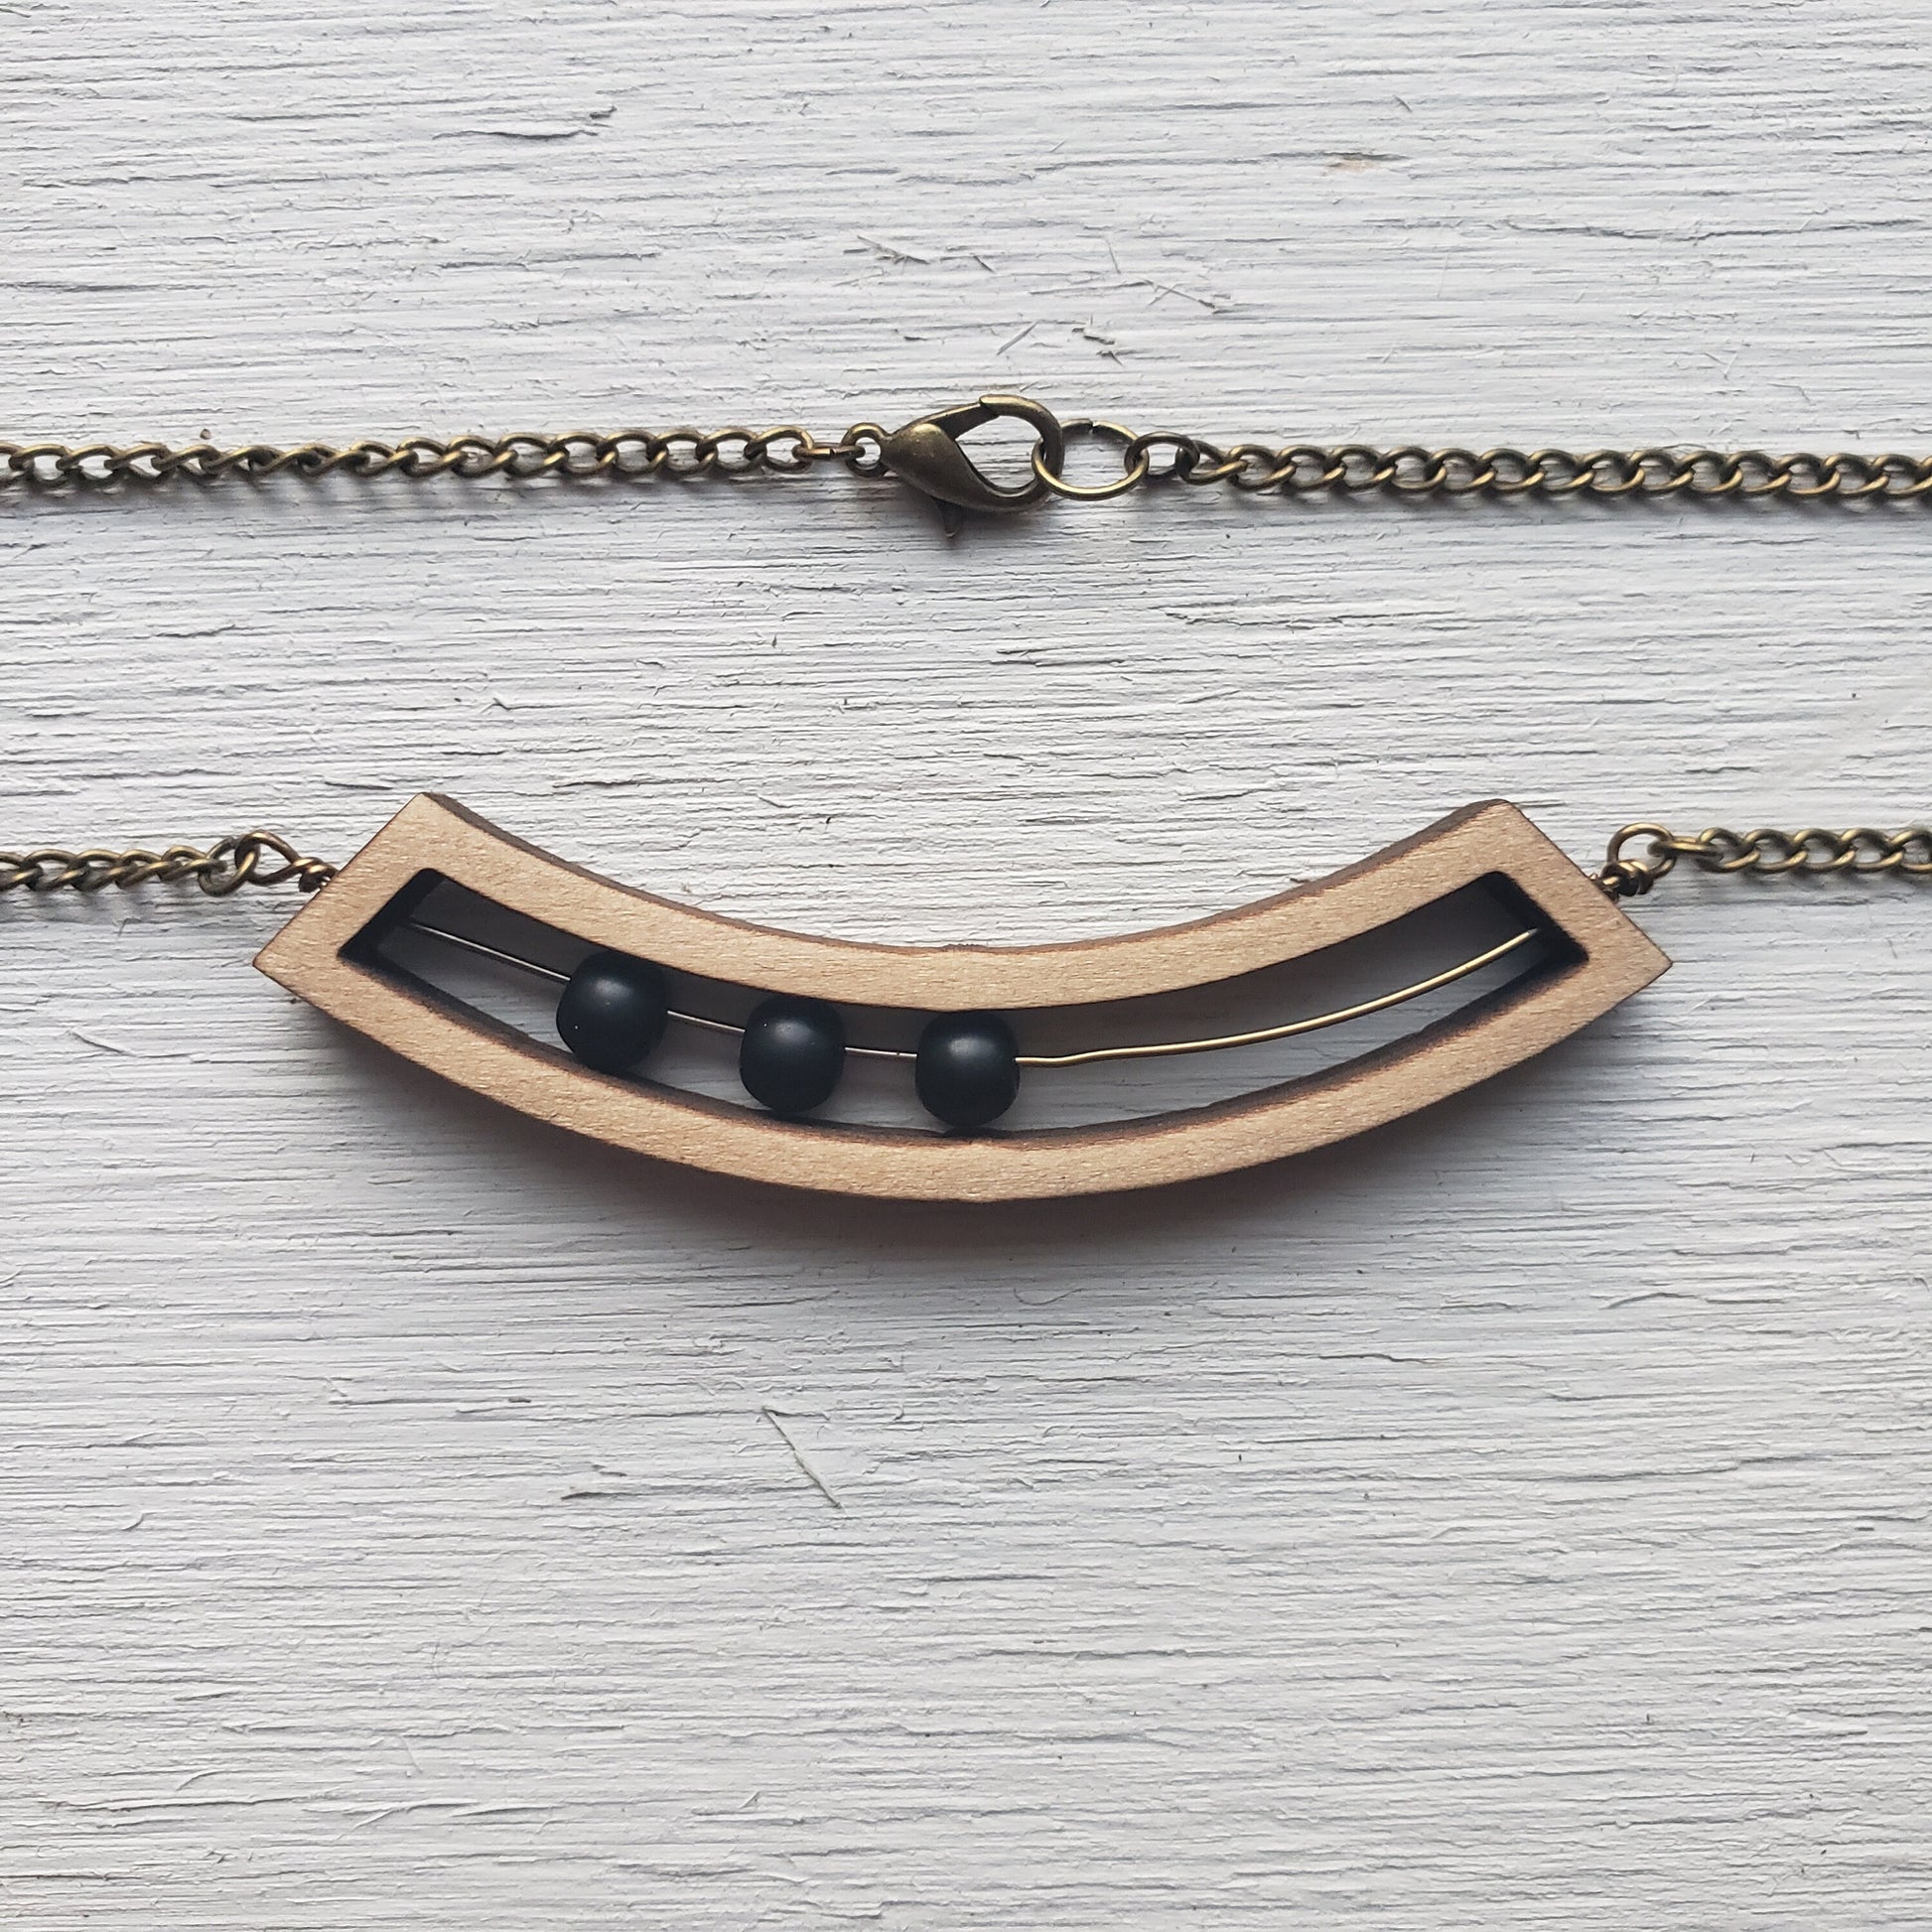 Wooden Abacus - Laser Cut Wood Necklace ||  Geometric Jewelry || 5th Anniversary Gift for her